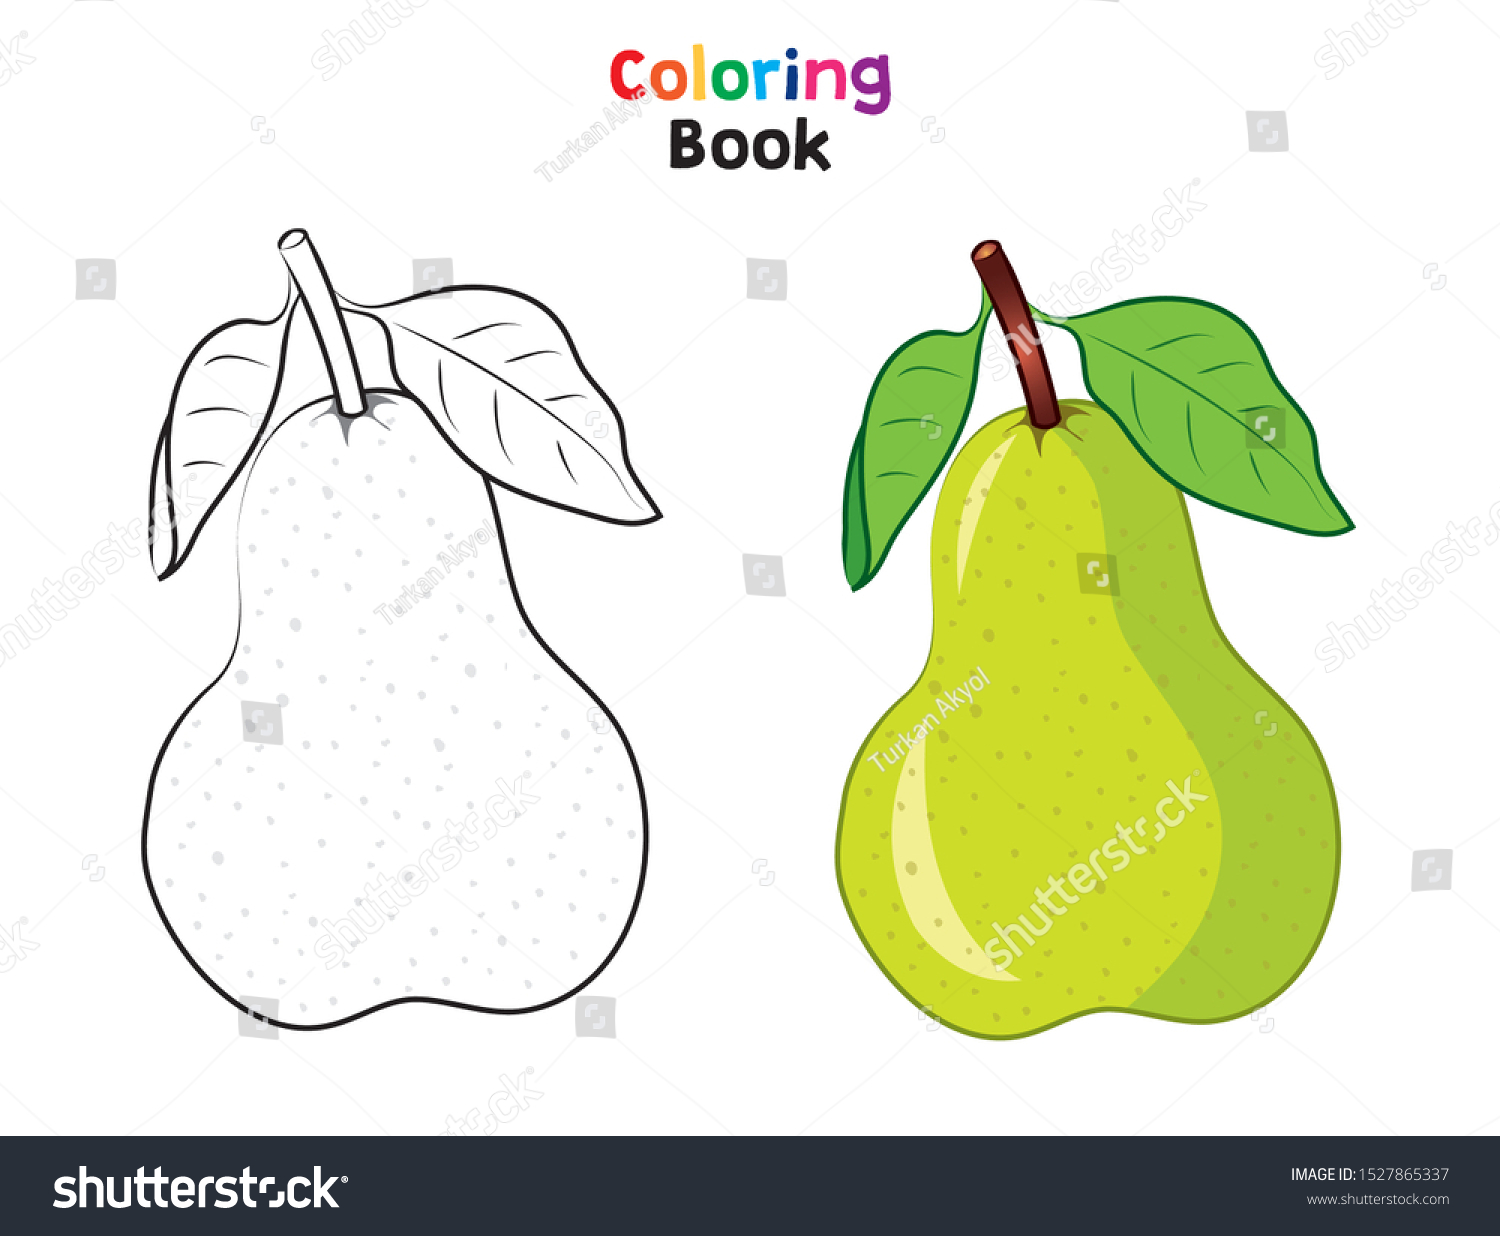 Green Fresh Pear Coloring Page Childrens Stock Vector Royalty Free 1527865337